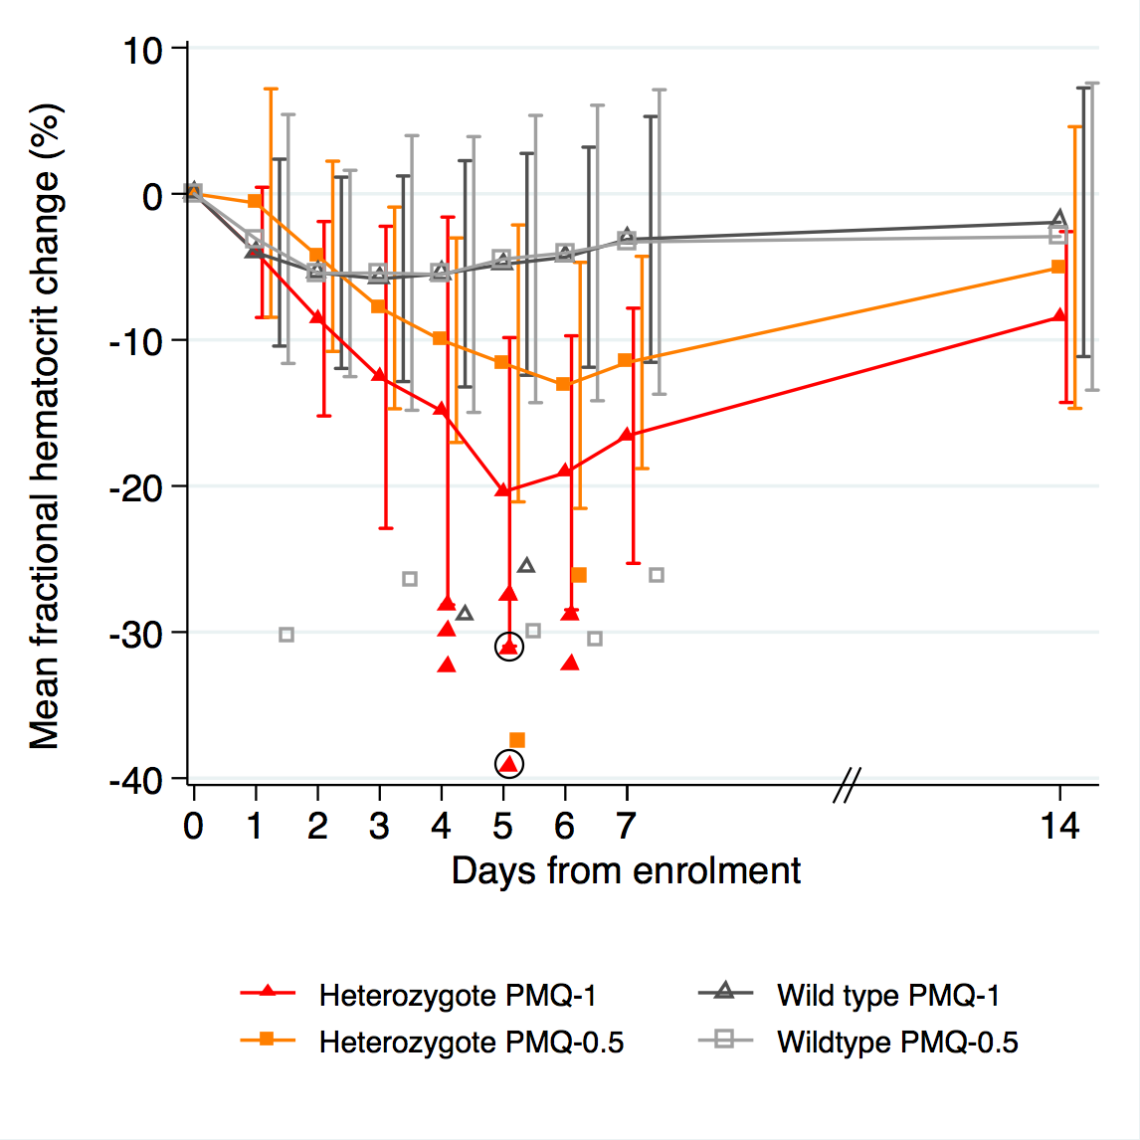 Haemolysis caused by primaquine is dose dependent: in red 1mg/kg/day and in orange 0.5 (standard treatment). Some individuals develop large fractional haematocrit reductions (plotted shapes). Circled individuals received a blood transfusion